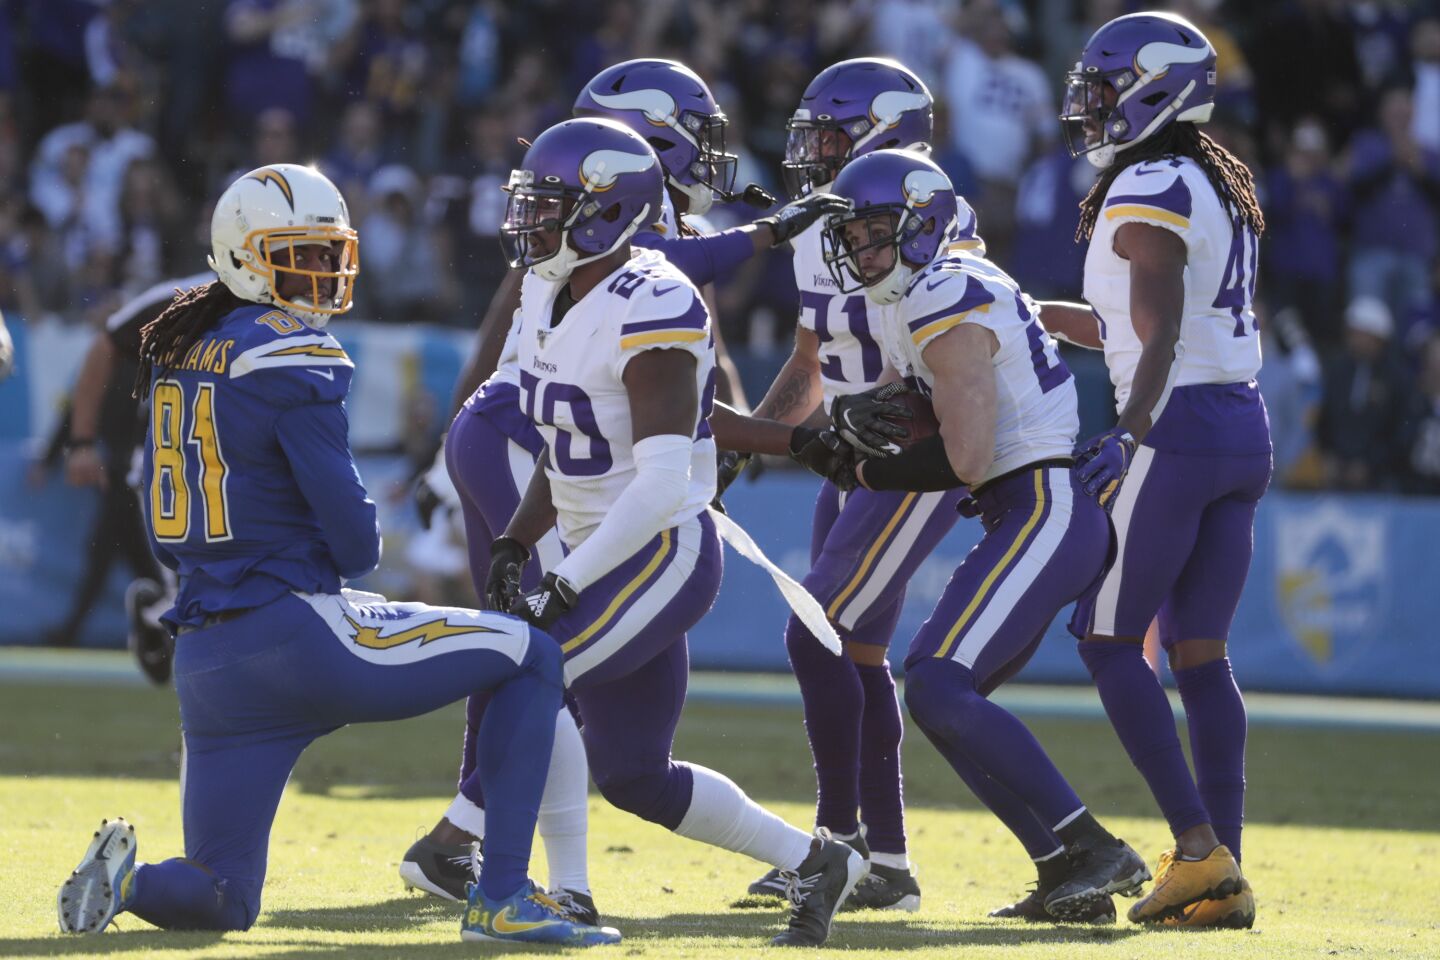 Chargers wide receiver Mike Williams looks on as Minnesota Vikings cornerback Mike Hughes celebrates with teammates after intercepting a pass by Chargers quarterback Philip Rivers.